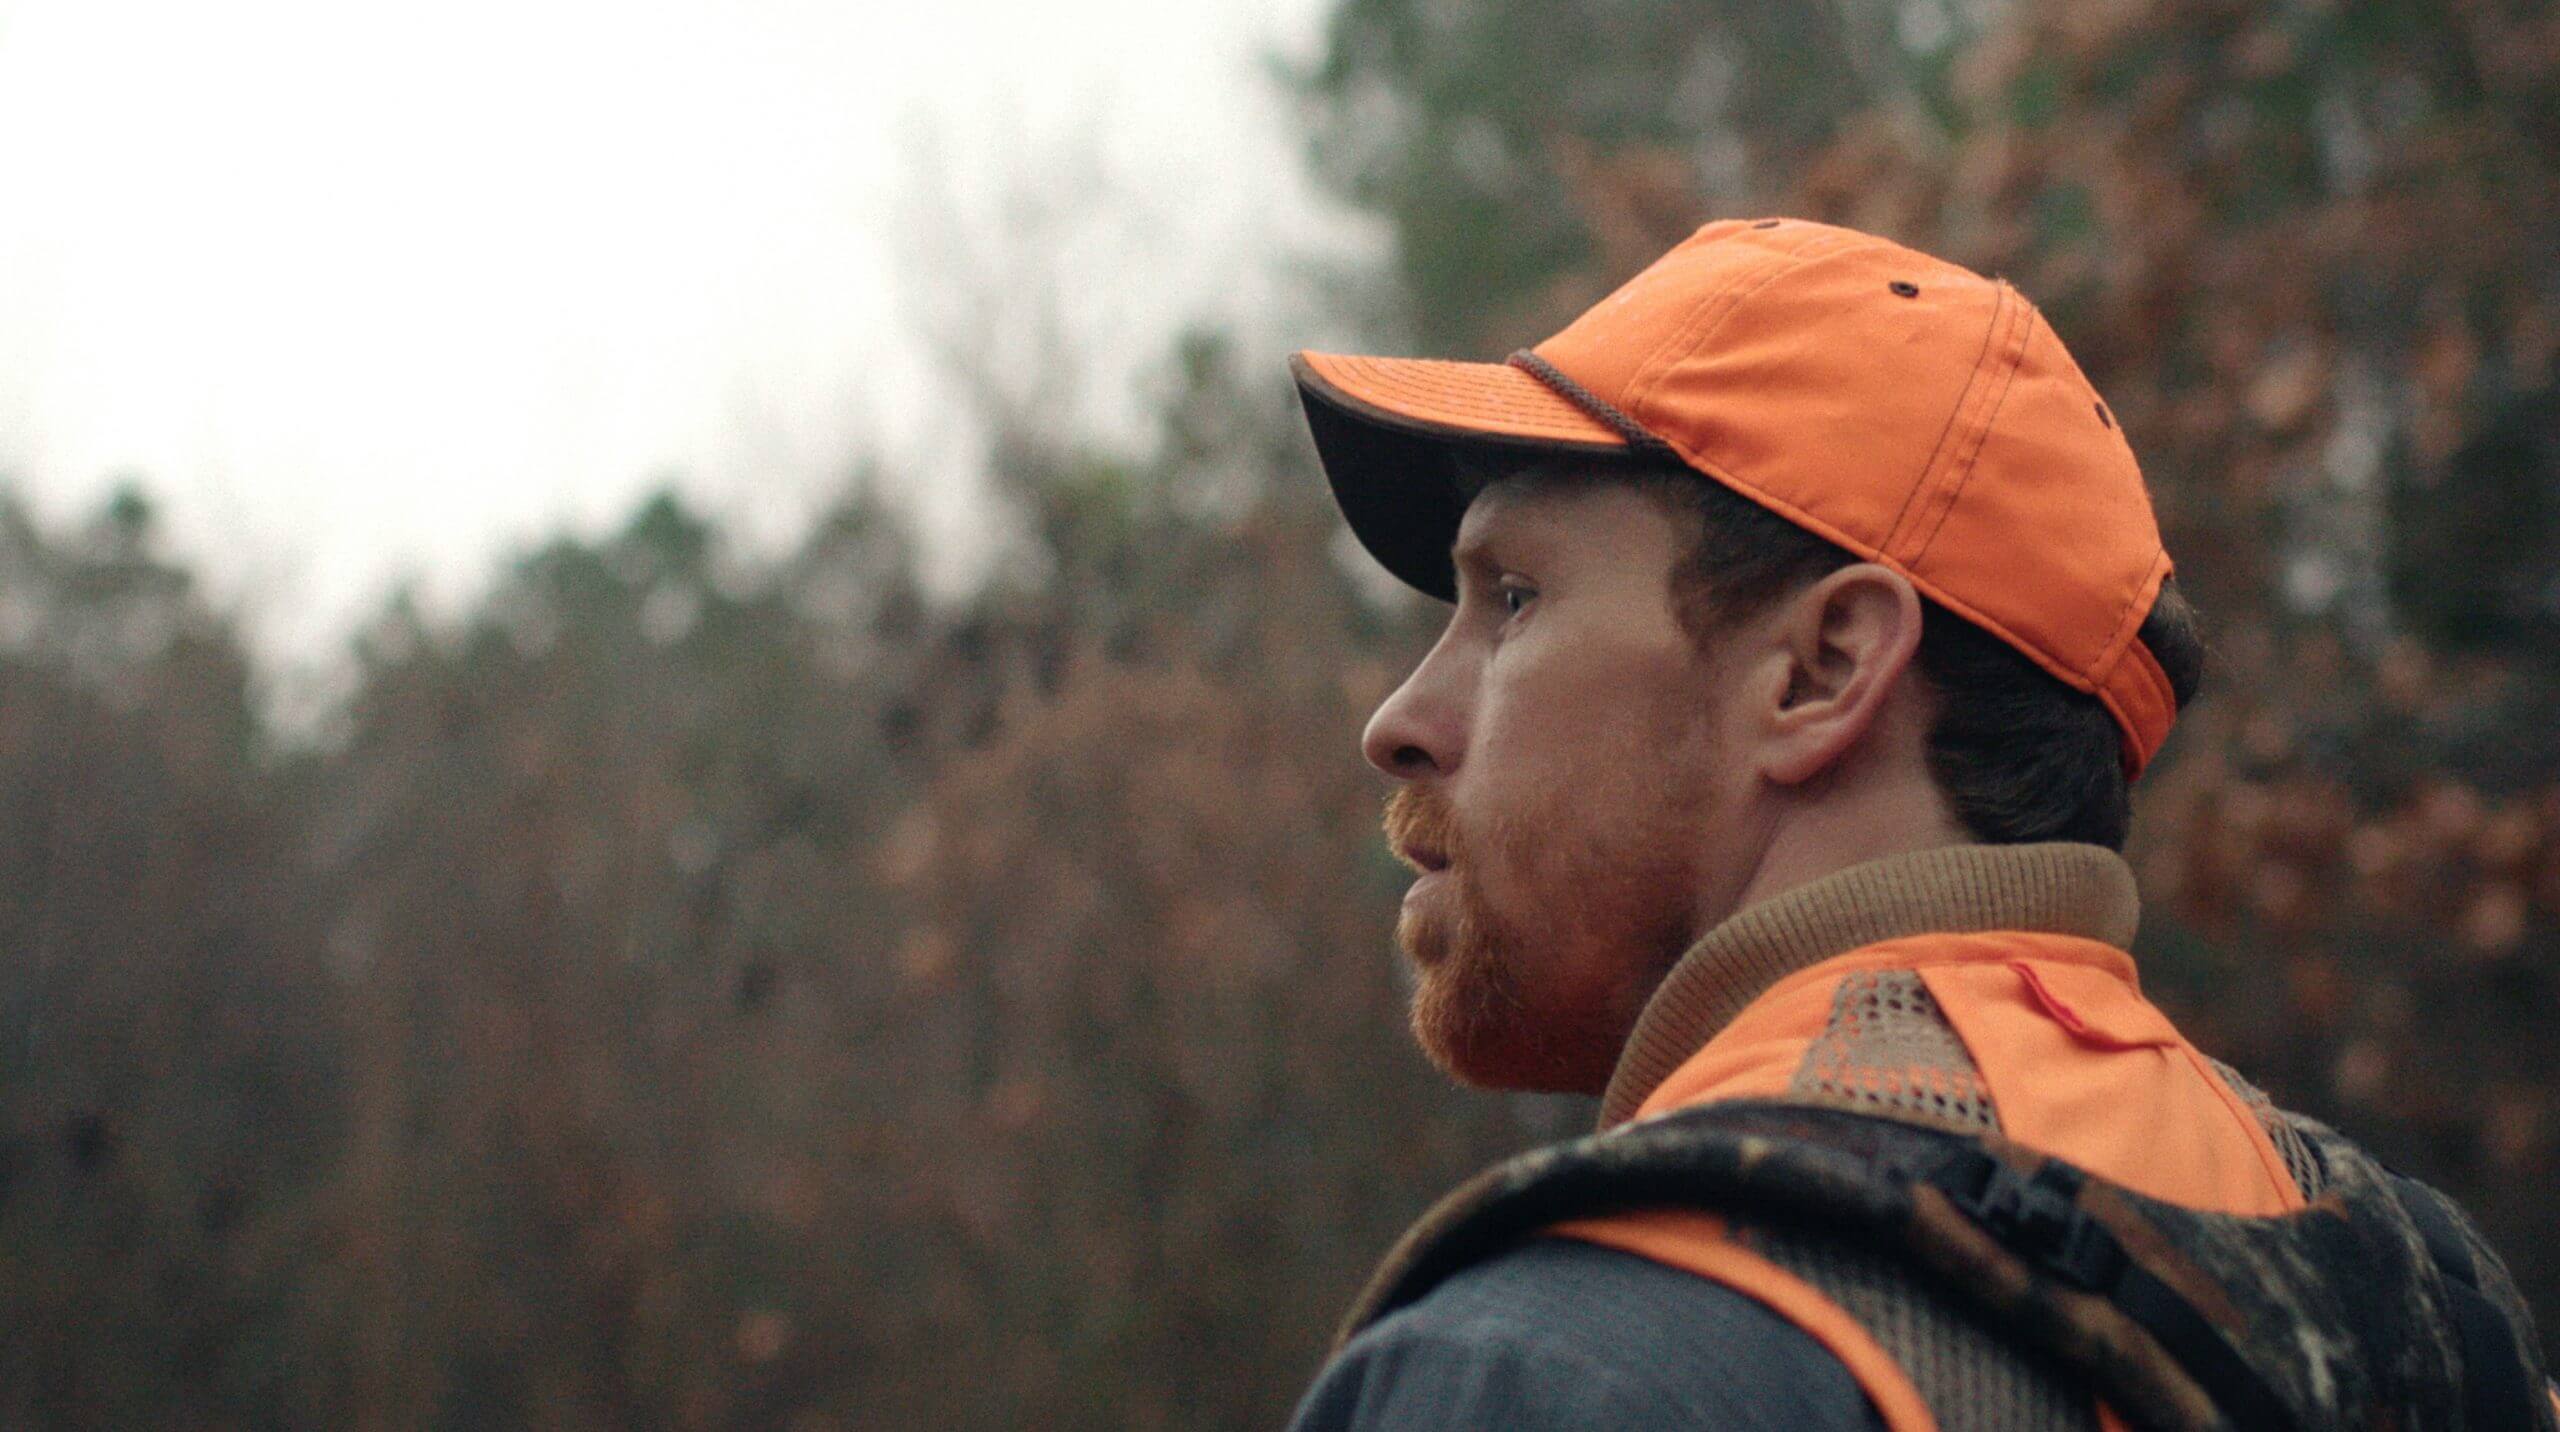 Still from One Shot One Kill. A man standing outside looks off camera, he is wearing an orange vest and hat.